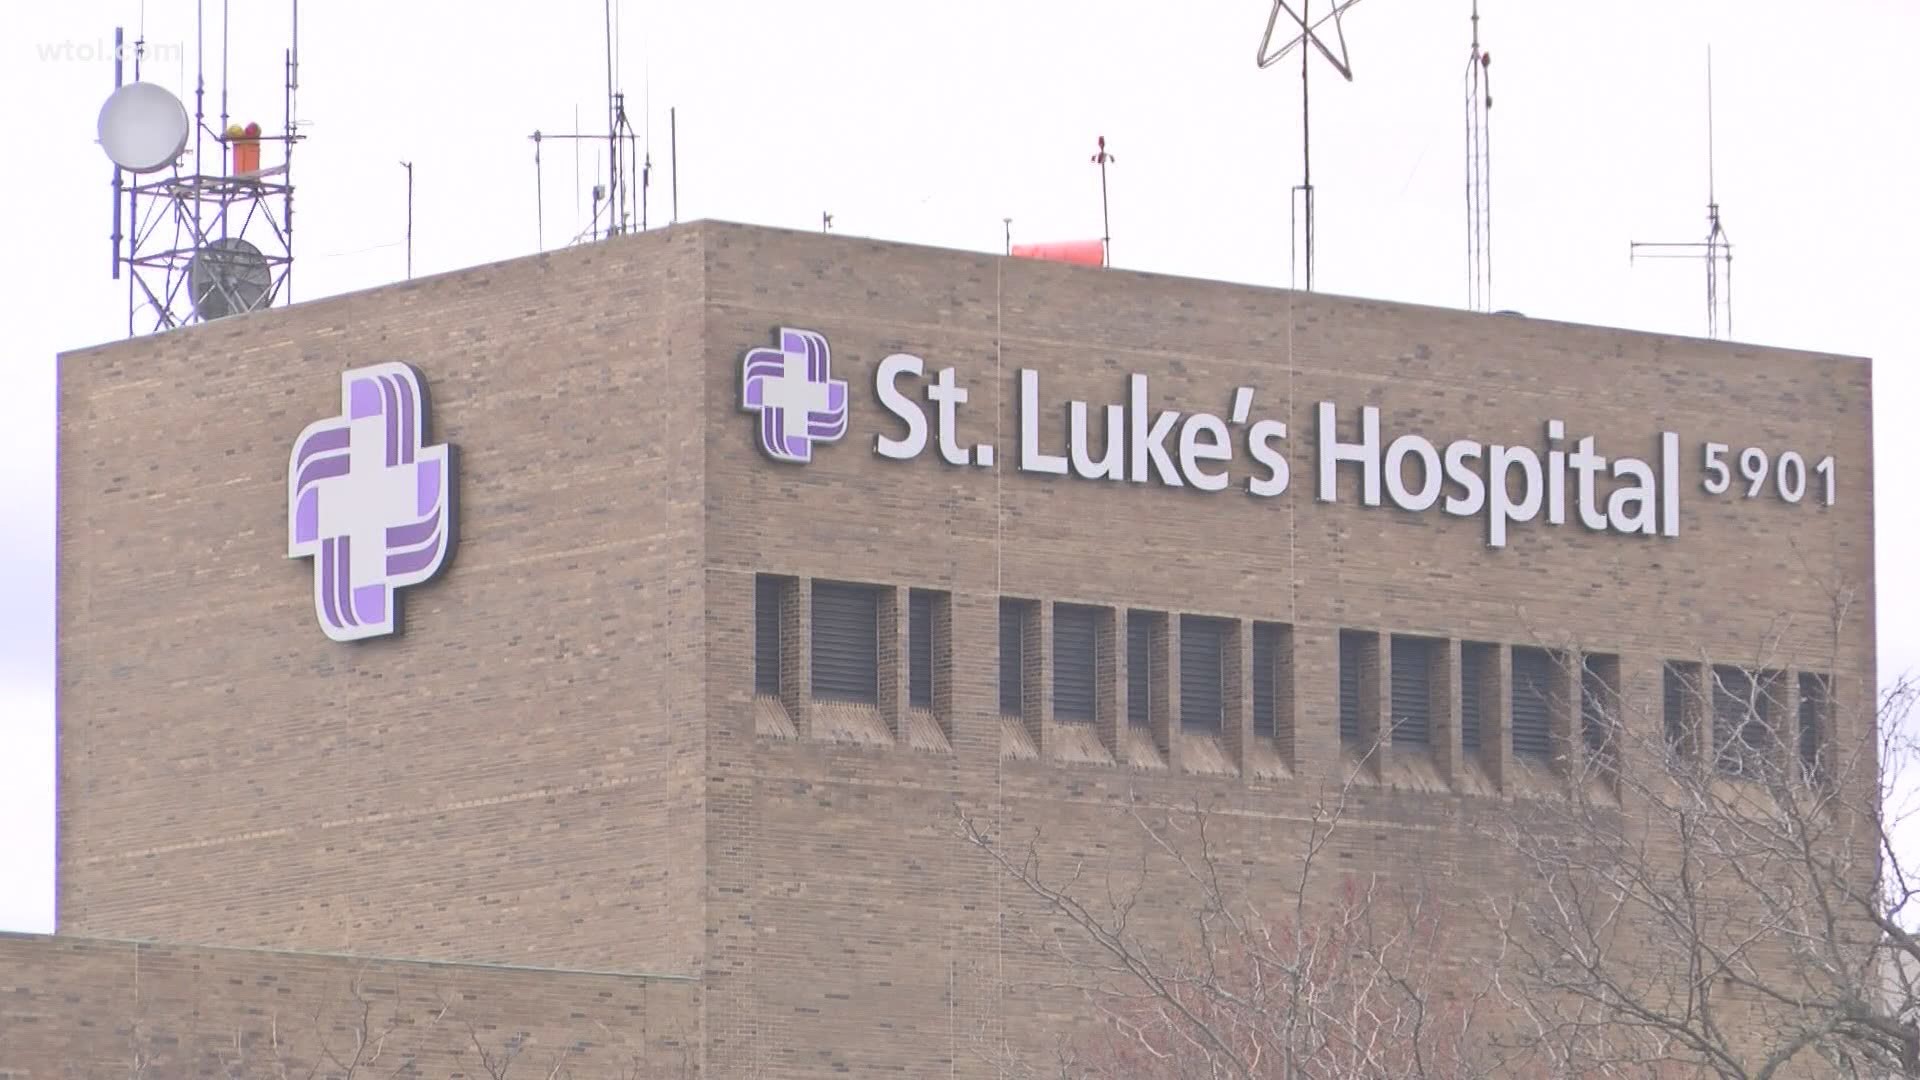 A judge denied ProMedica's motion to dismiss the case and ruled in McLaren St. Luke's favor, after Paramount announced termination of hospital's in-network status.